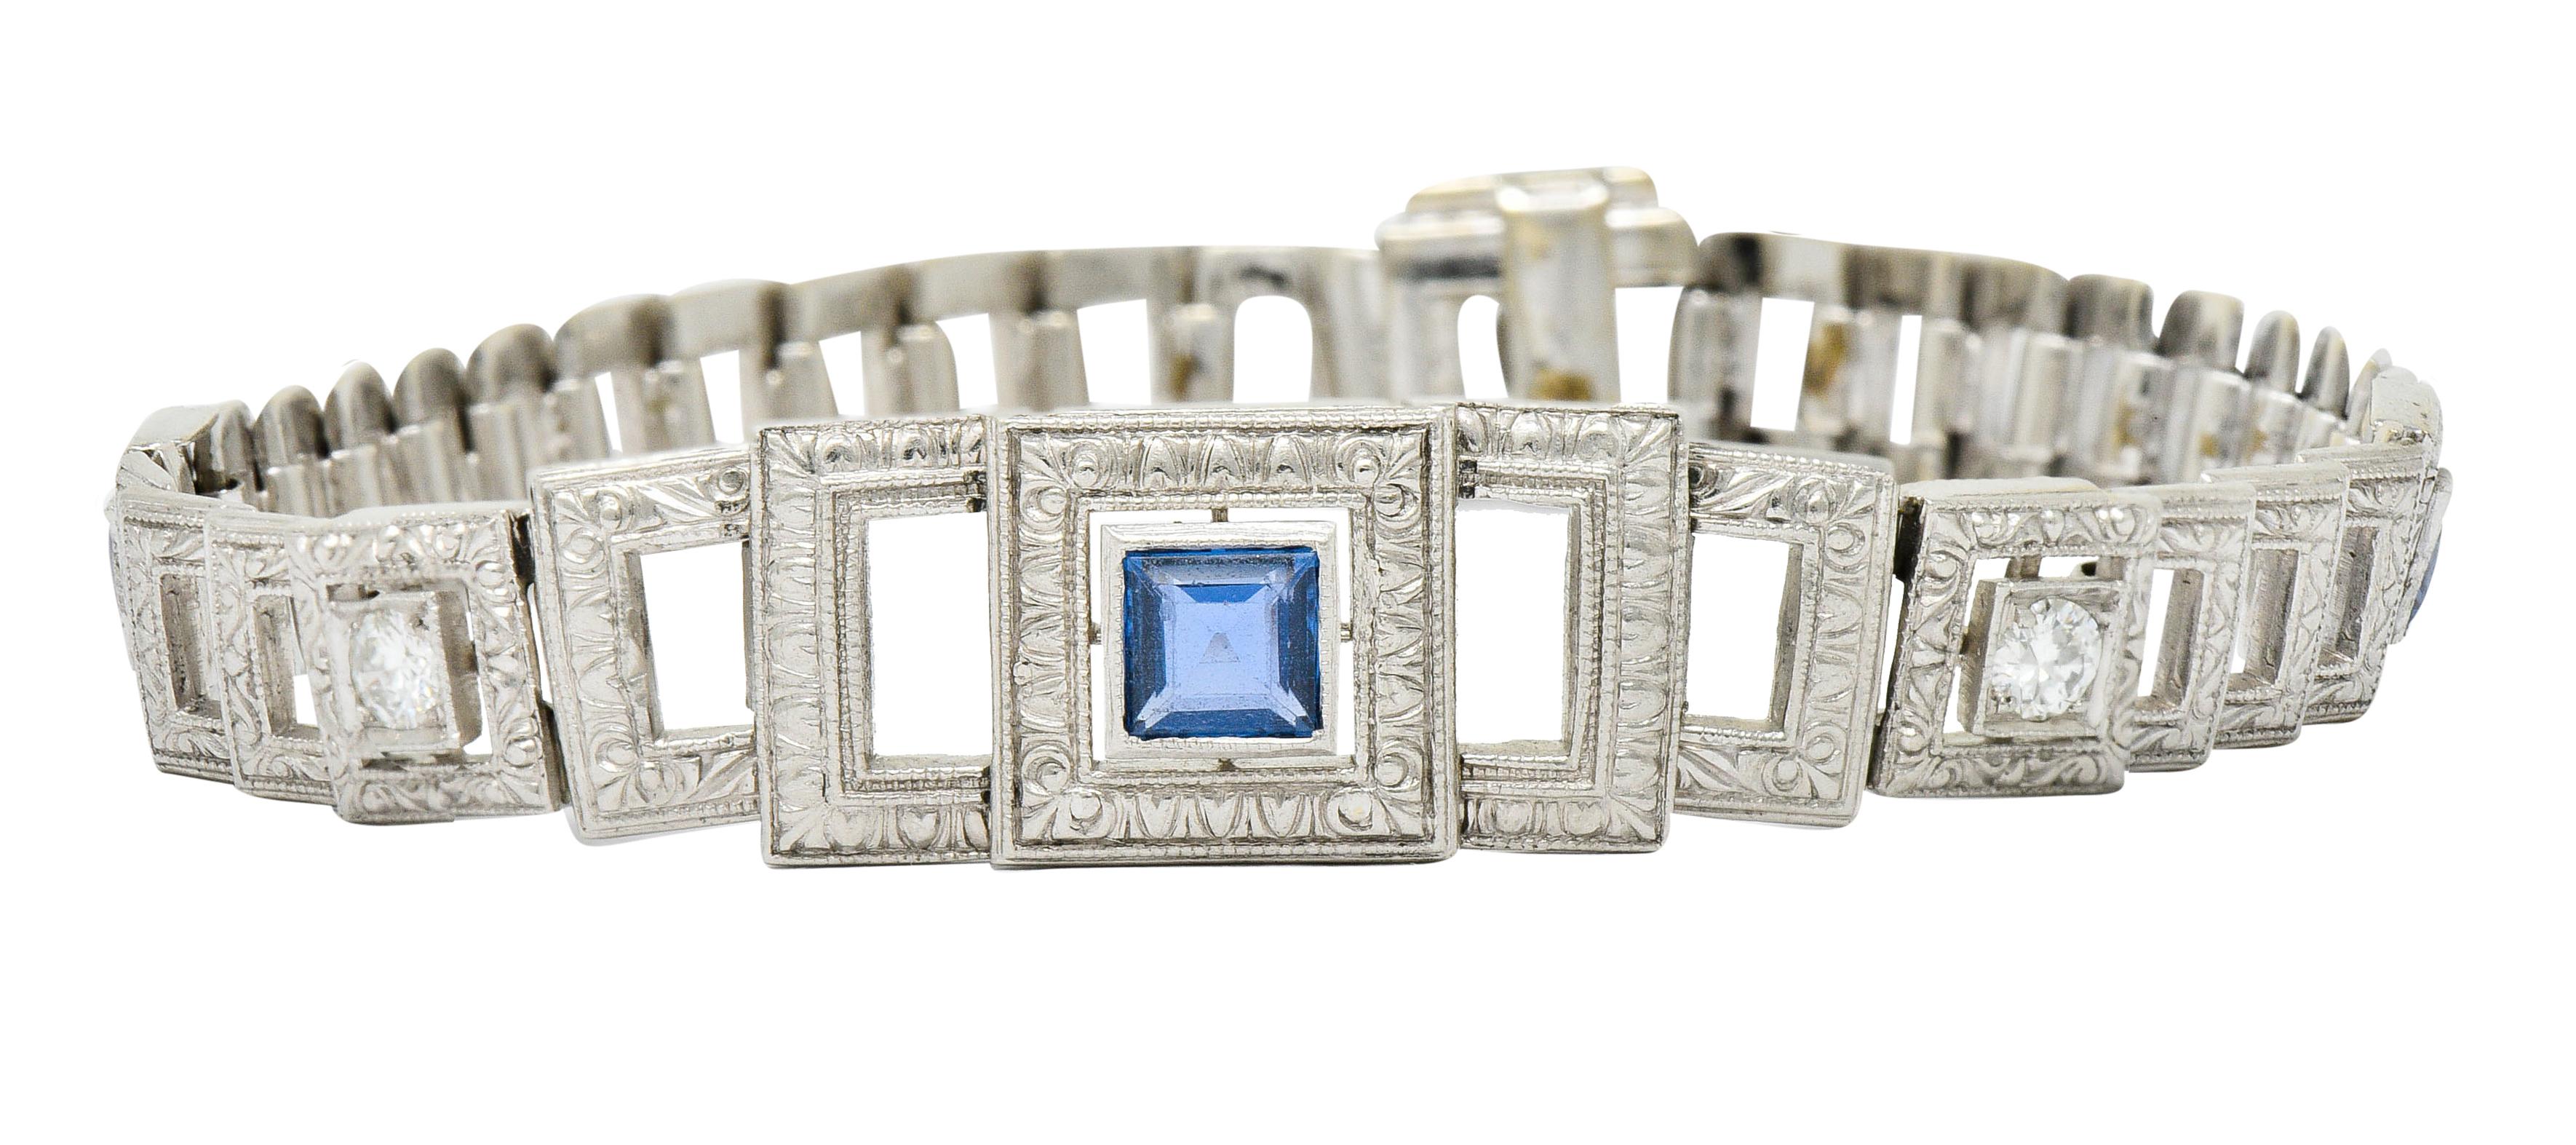 Link style bracelet comprised of cascading square links, deeply engraved

Centering three square step cut sapphire weighing approximately 1.10 carats total

Transparent with well-matched cornflower blue color

Accented by two round brilliant cut